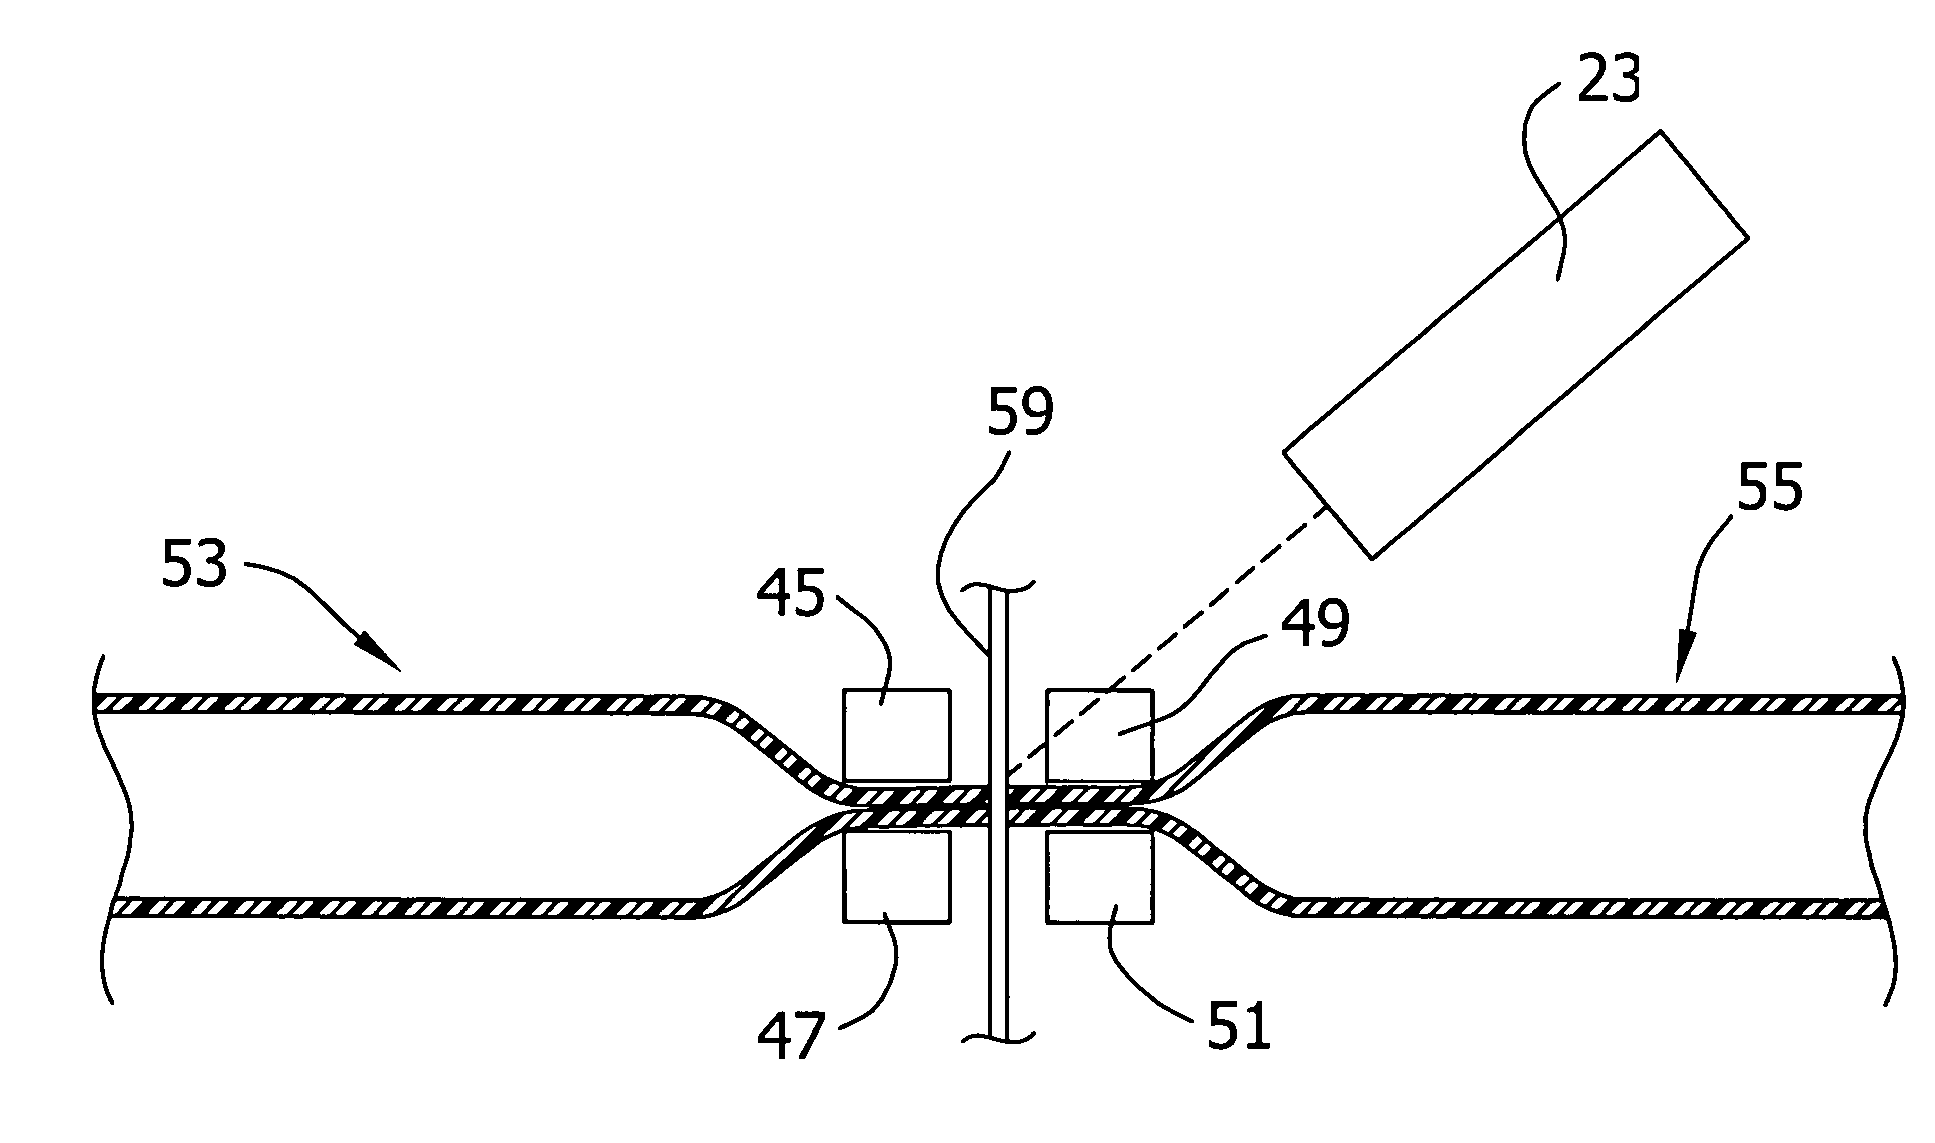 Method for sterile connection of tubing